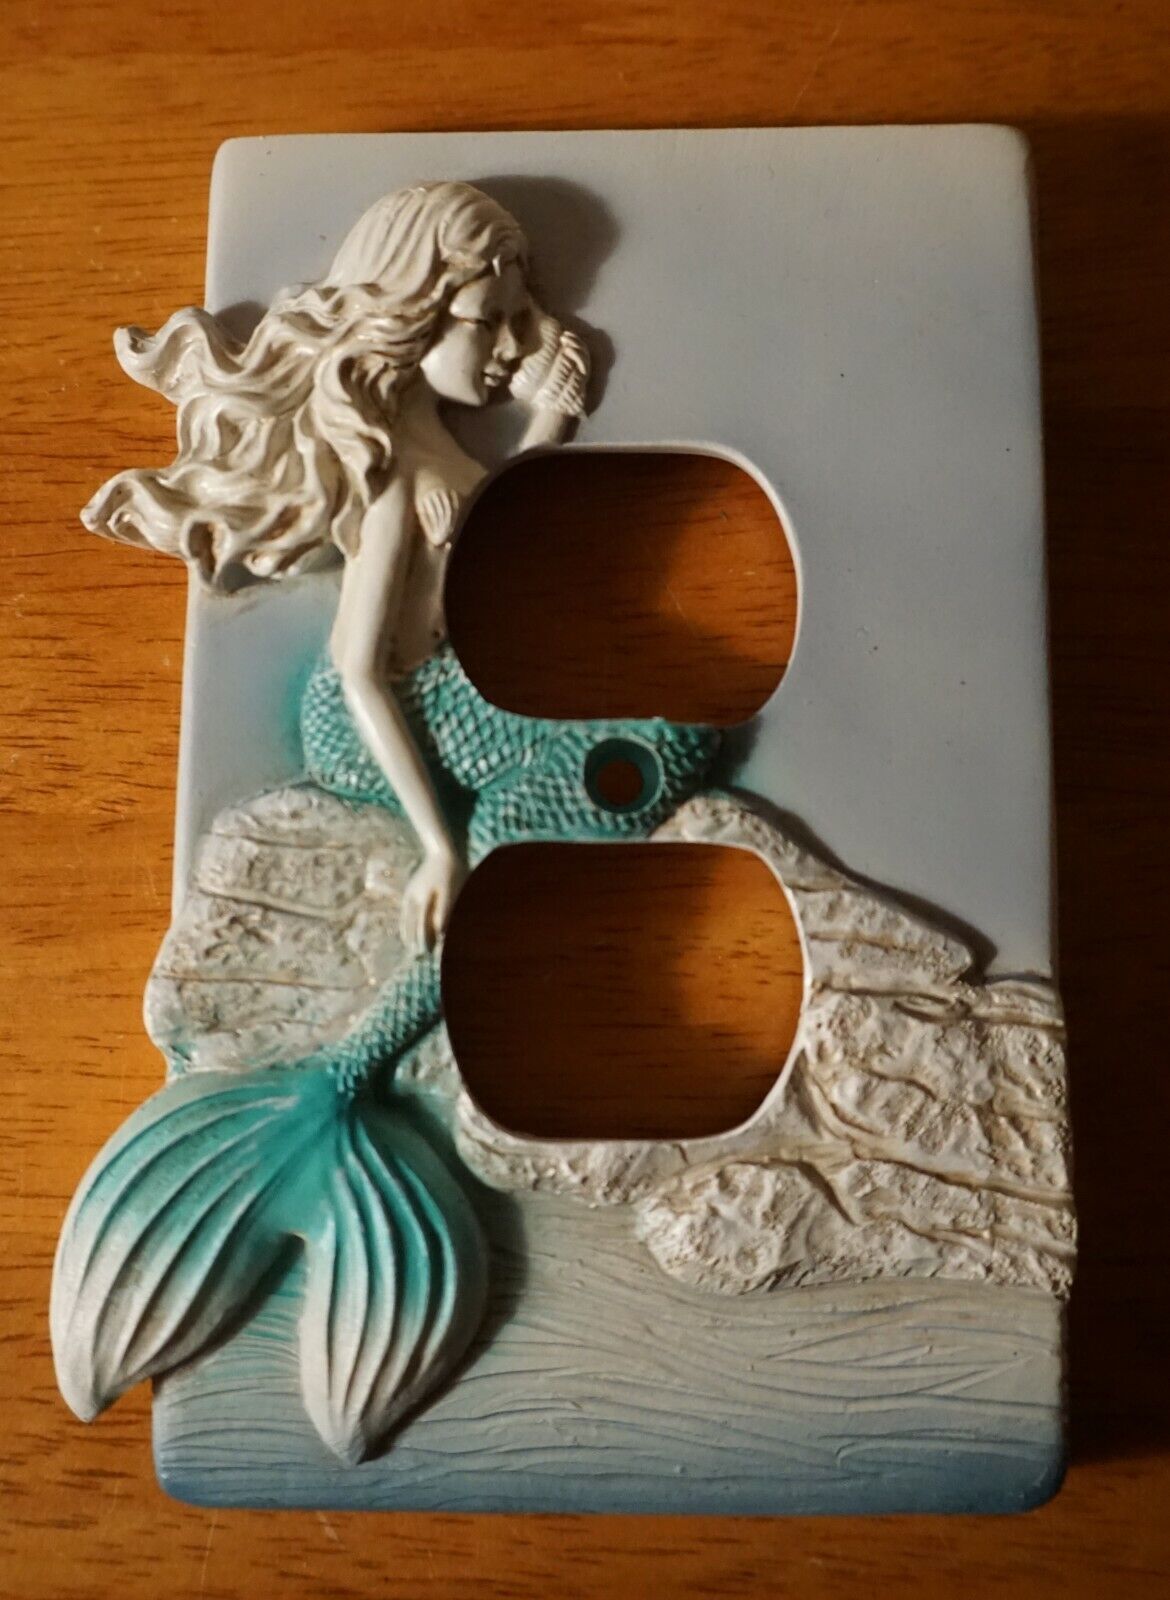 Mermaid Conch Shell Single Outlet Wall Plate Cover BEACH BEDROOM HOME DECOR New